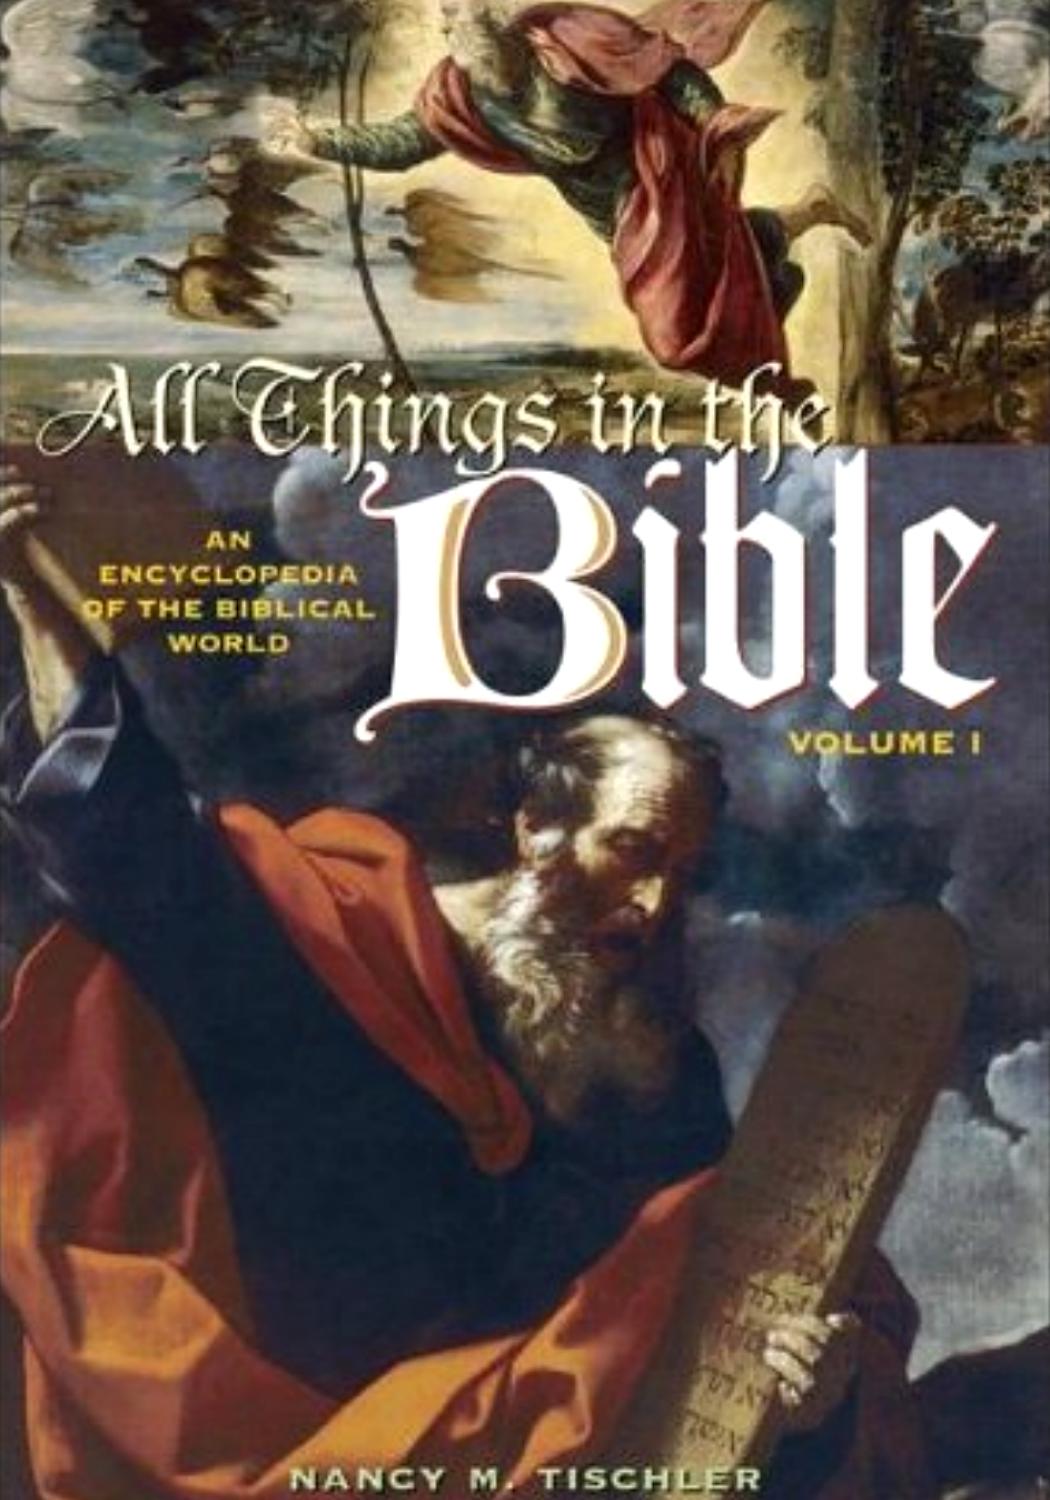 All Things in the Bible: A-L